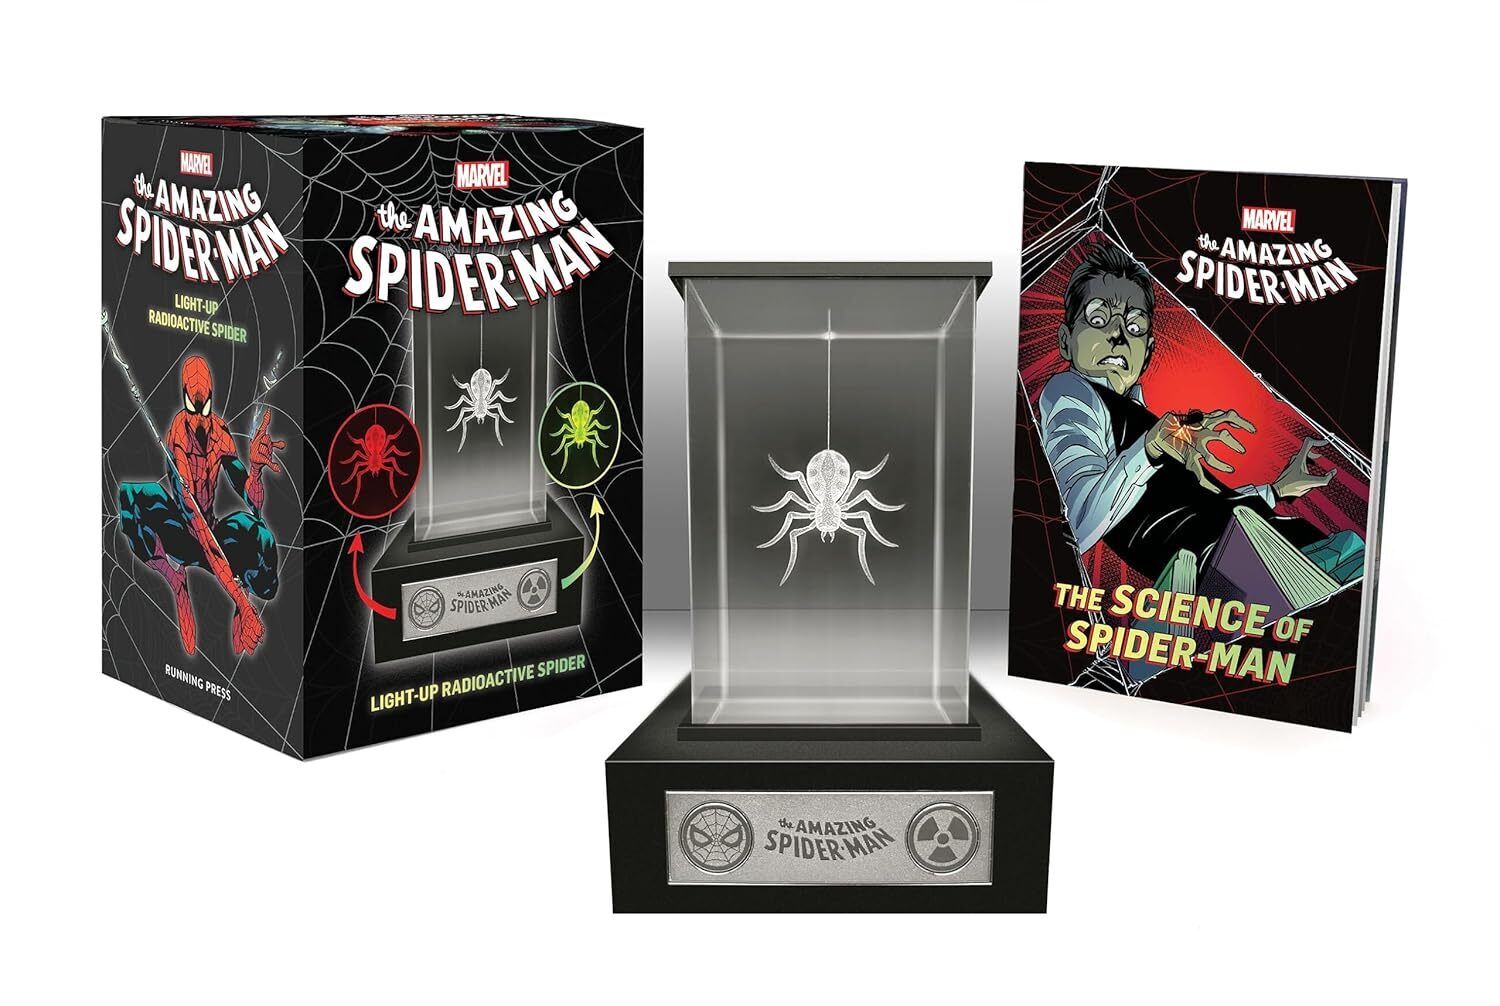 Marvel: The Amazing Spider-Man Light-Up Radioactive Spider Cards